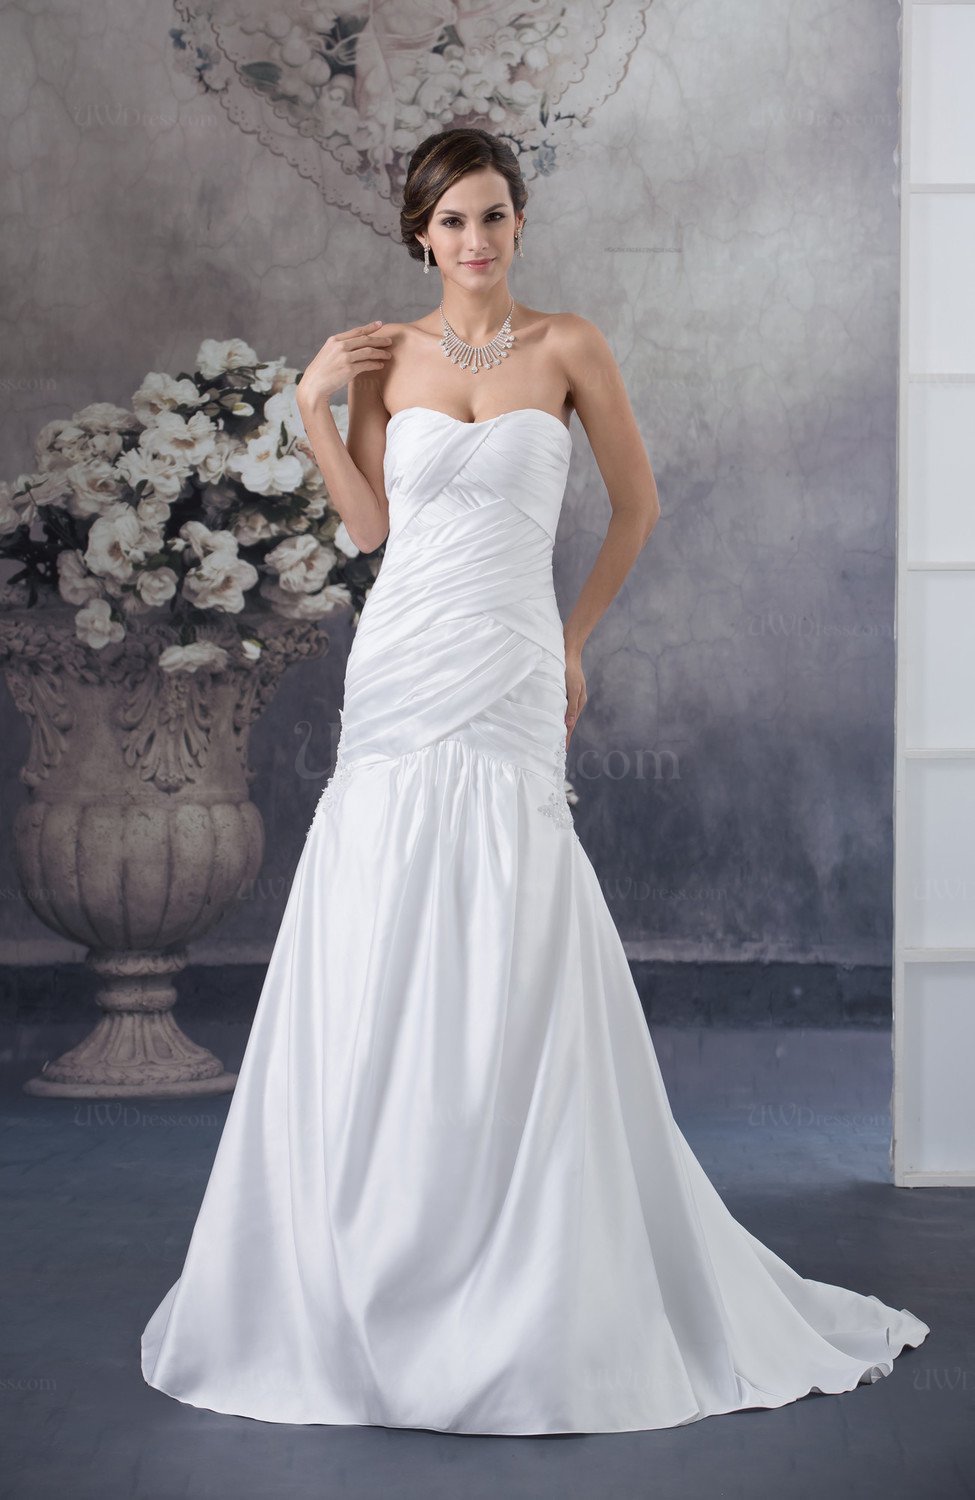 White Allure Bridal Gowns Inexpensive Unique Country Elegant Formal ...